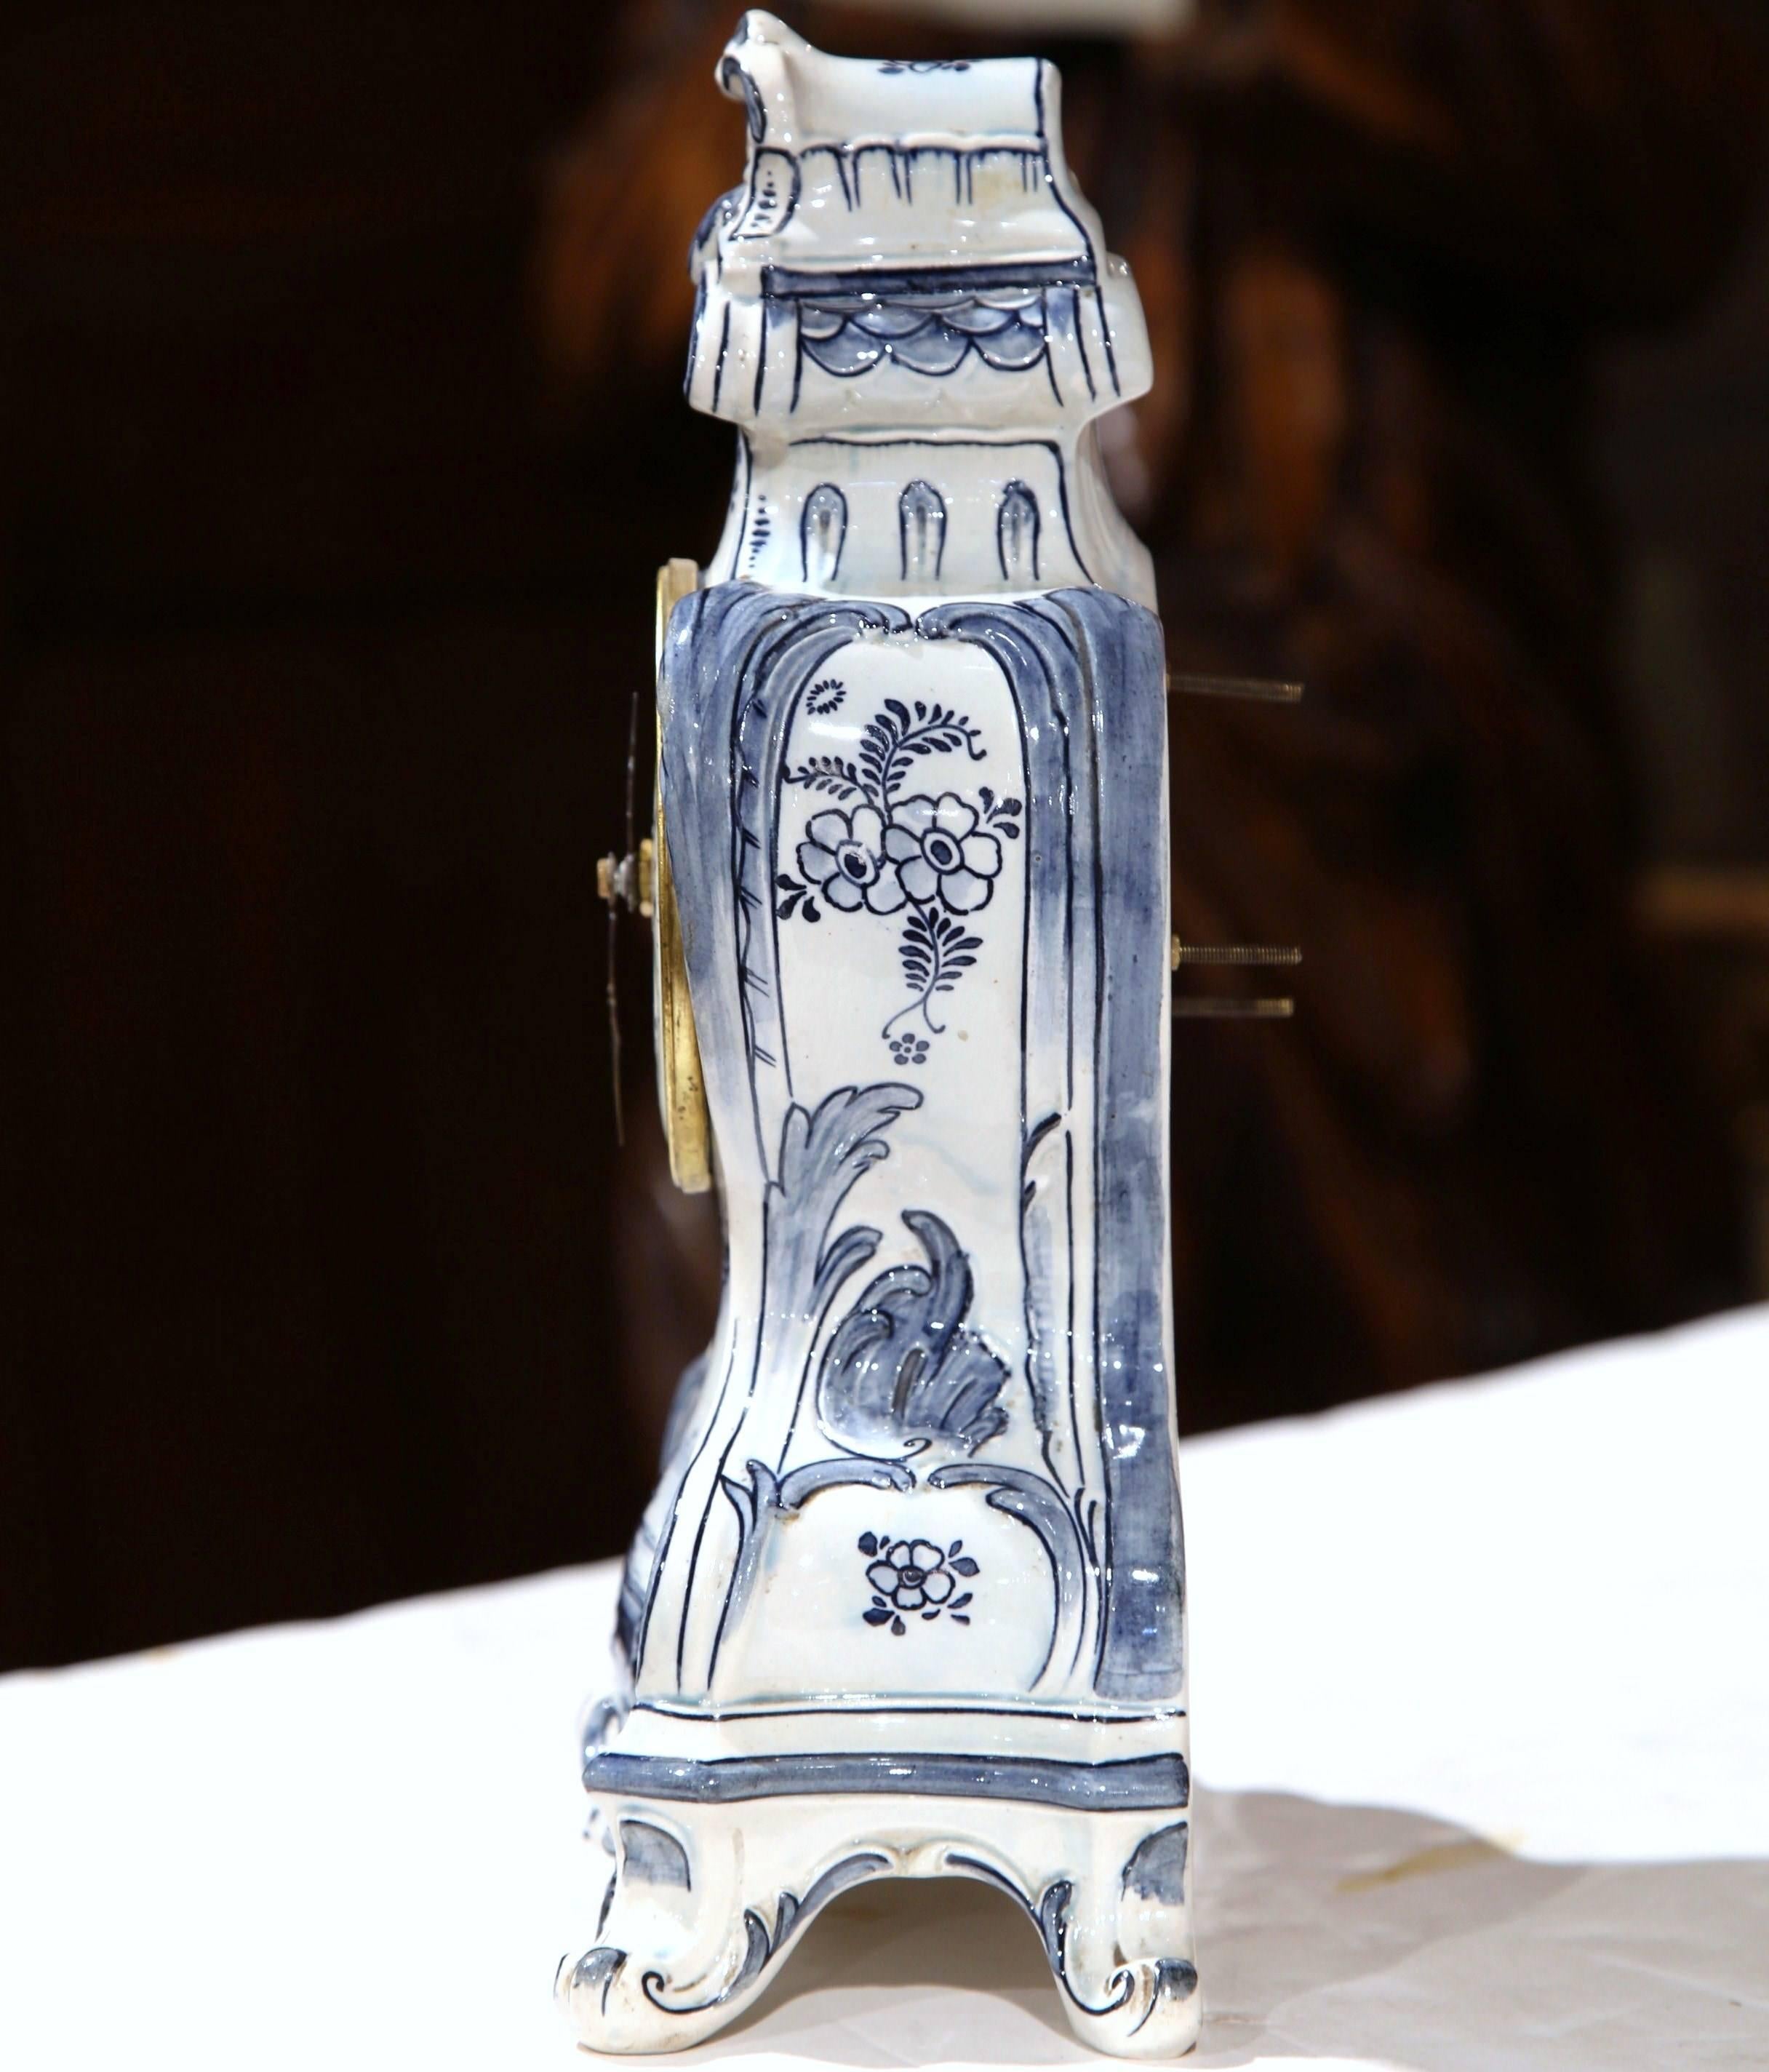 Faience 19th Century French Blue and White Hand-Painted Desk or Mantel Delft Clock